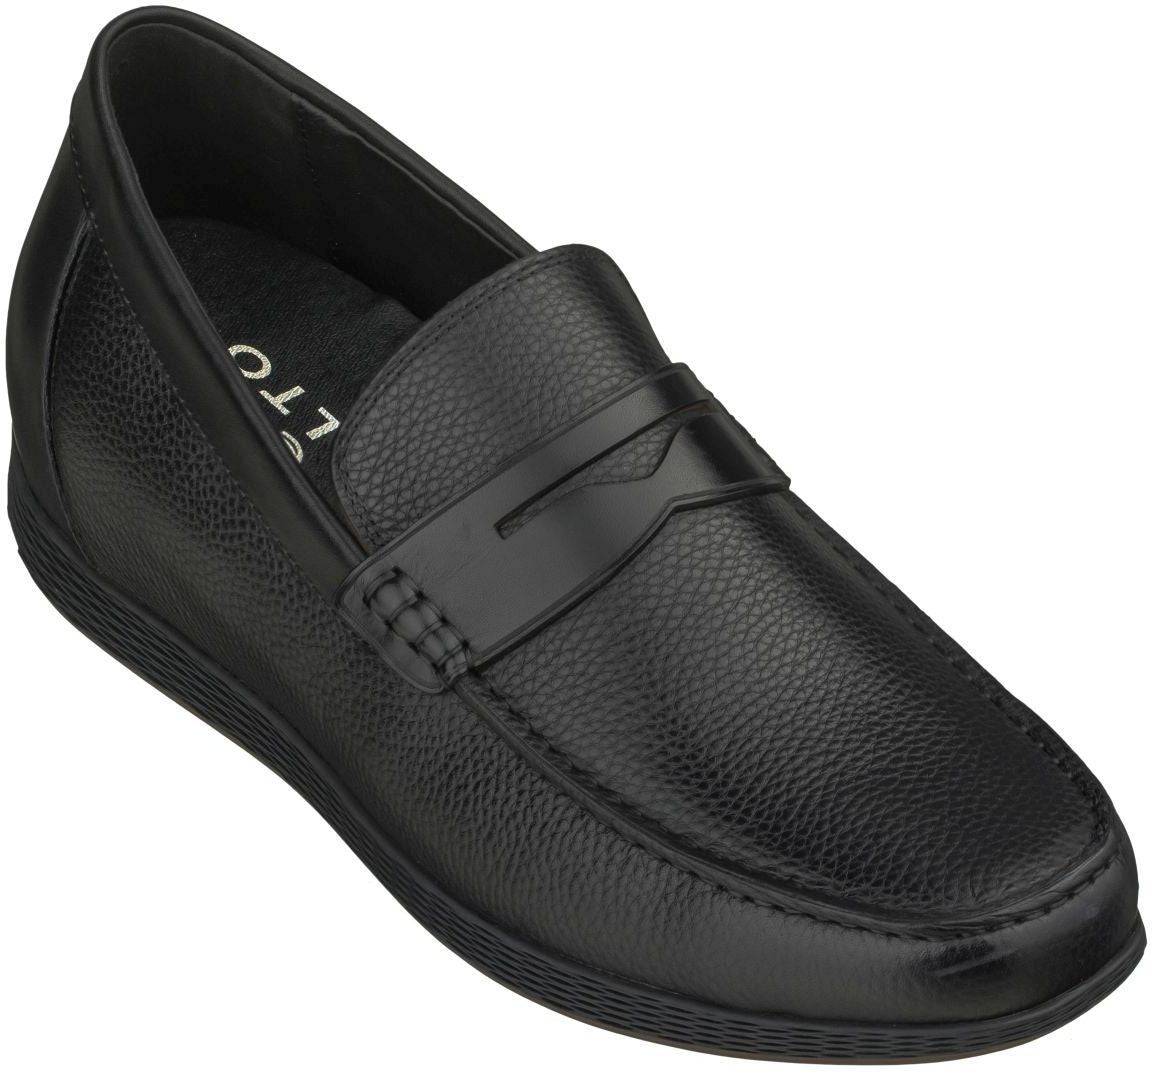 Elevator shoes height increase CALTO Black Penny Loafer Elevator Shoes - 2.4 Inches - S1090